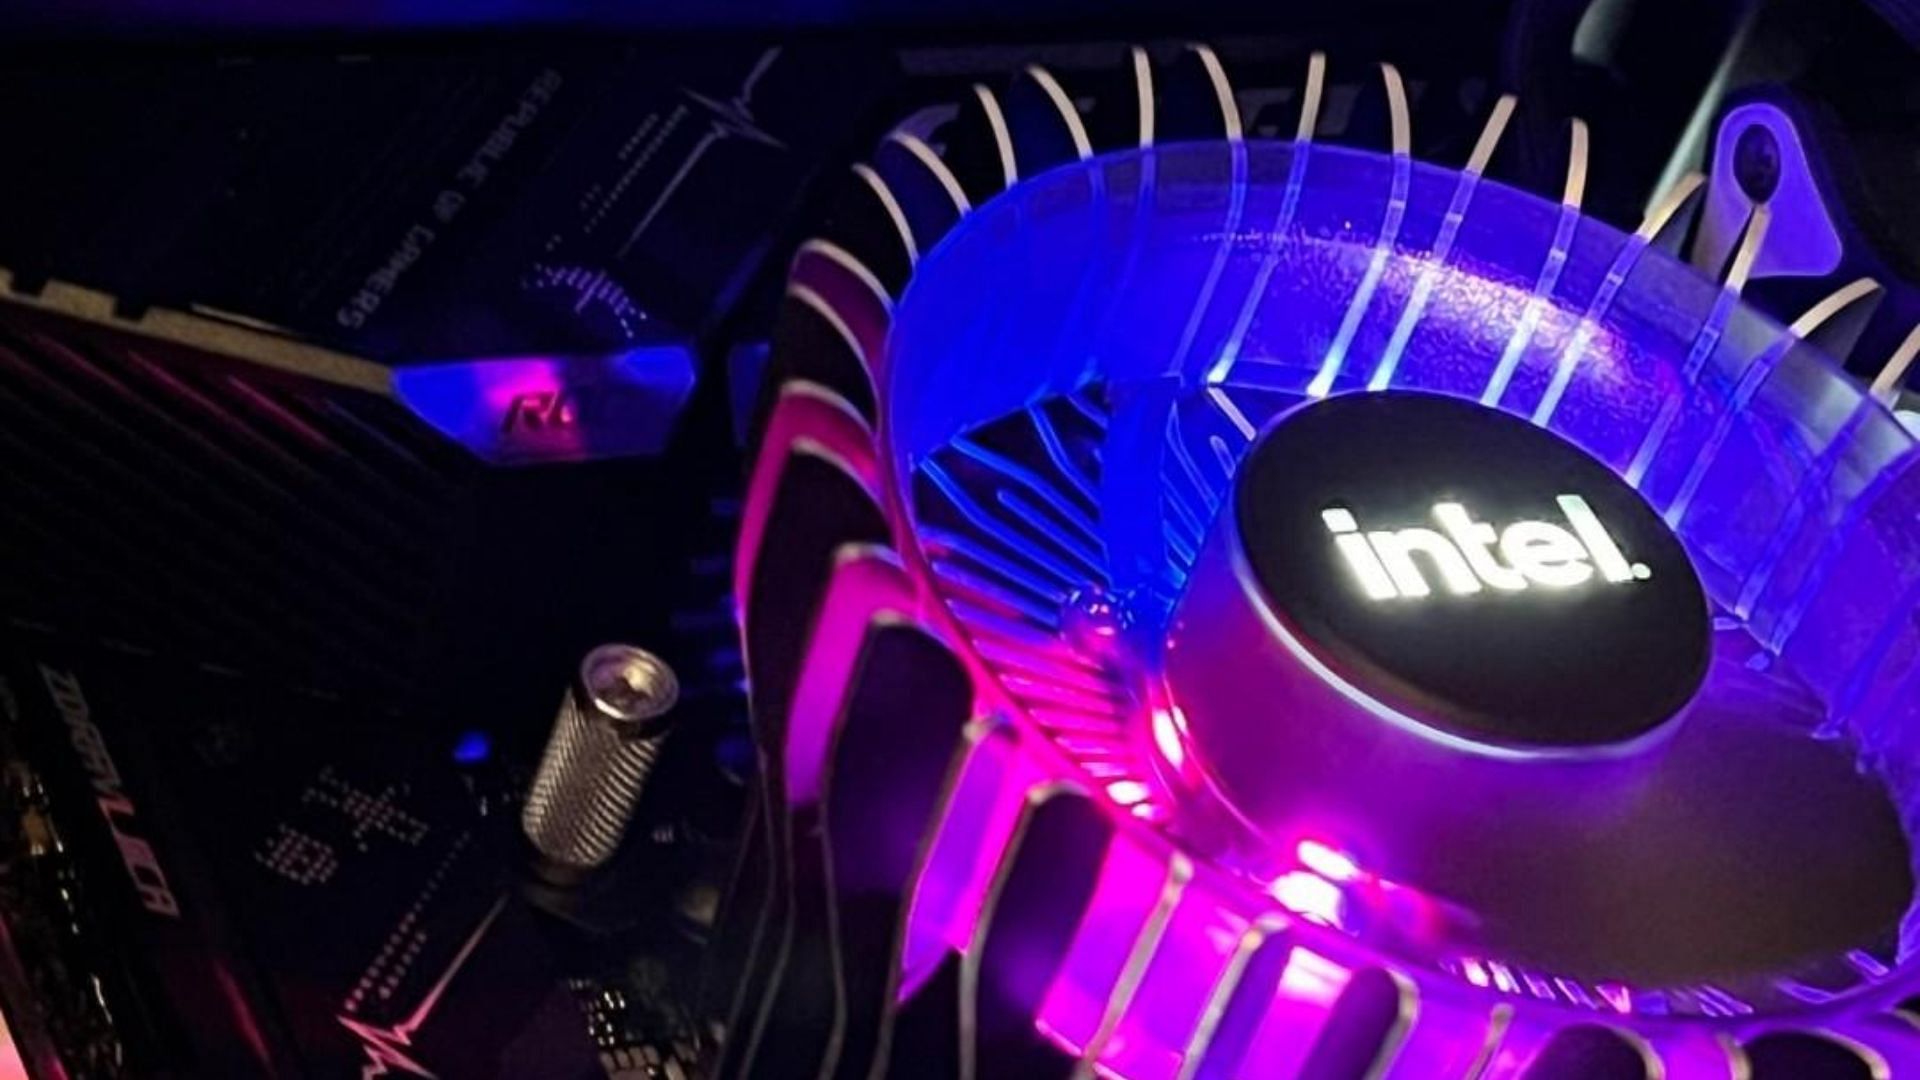 Enthusiasts are currently overclocking Intel